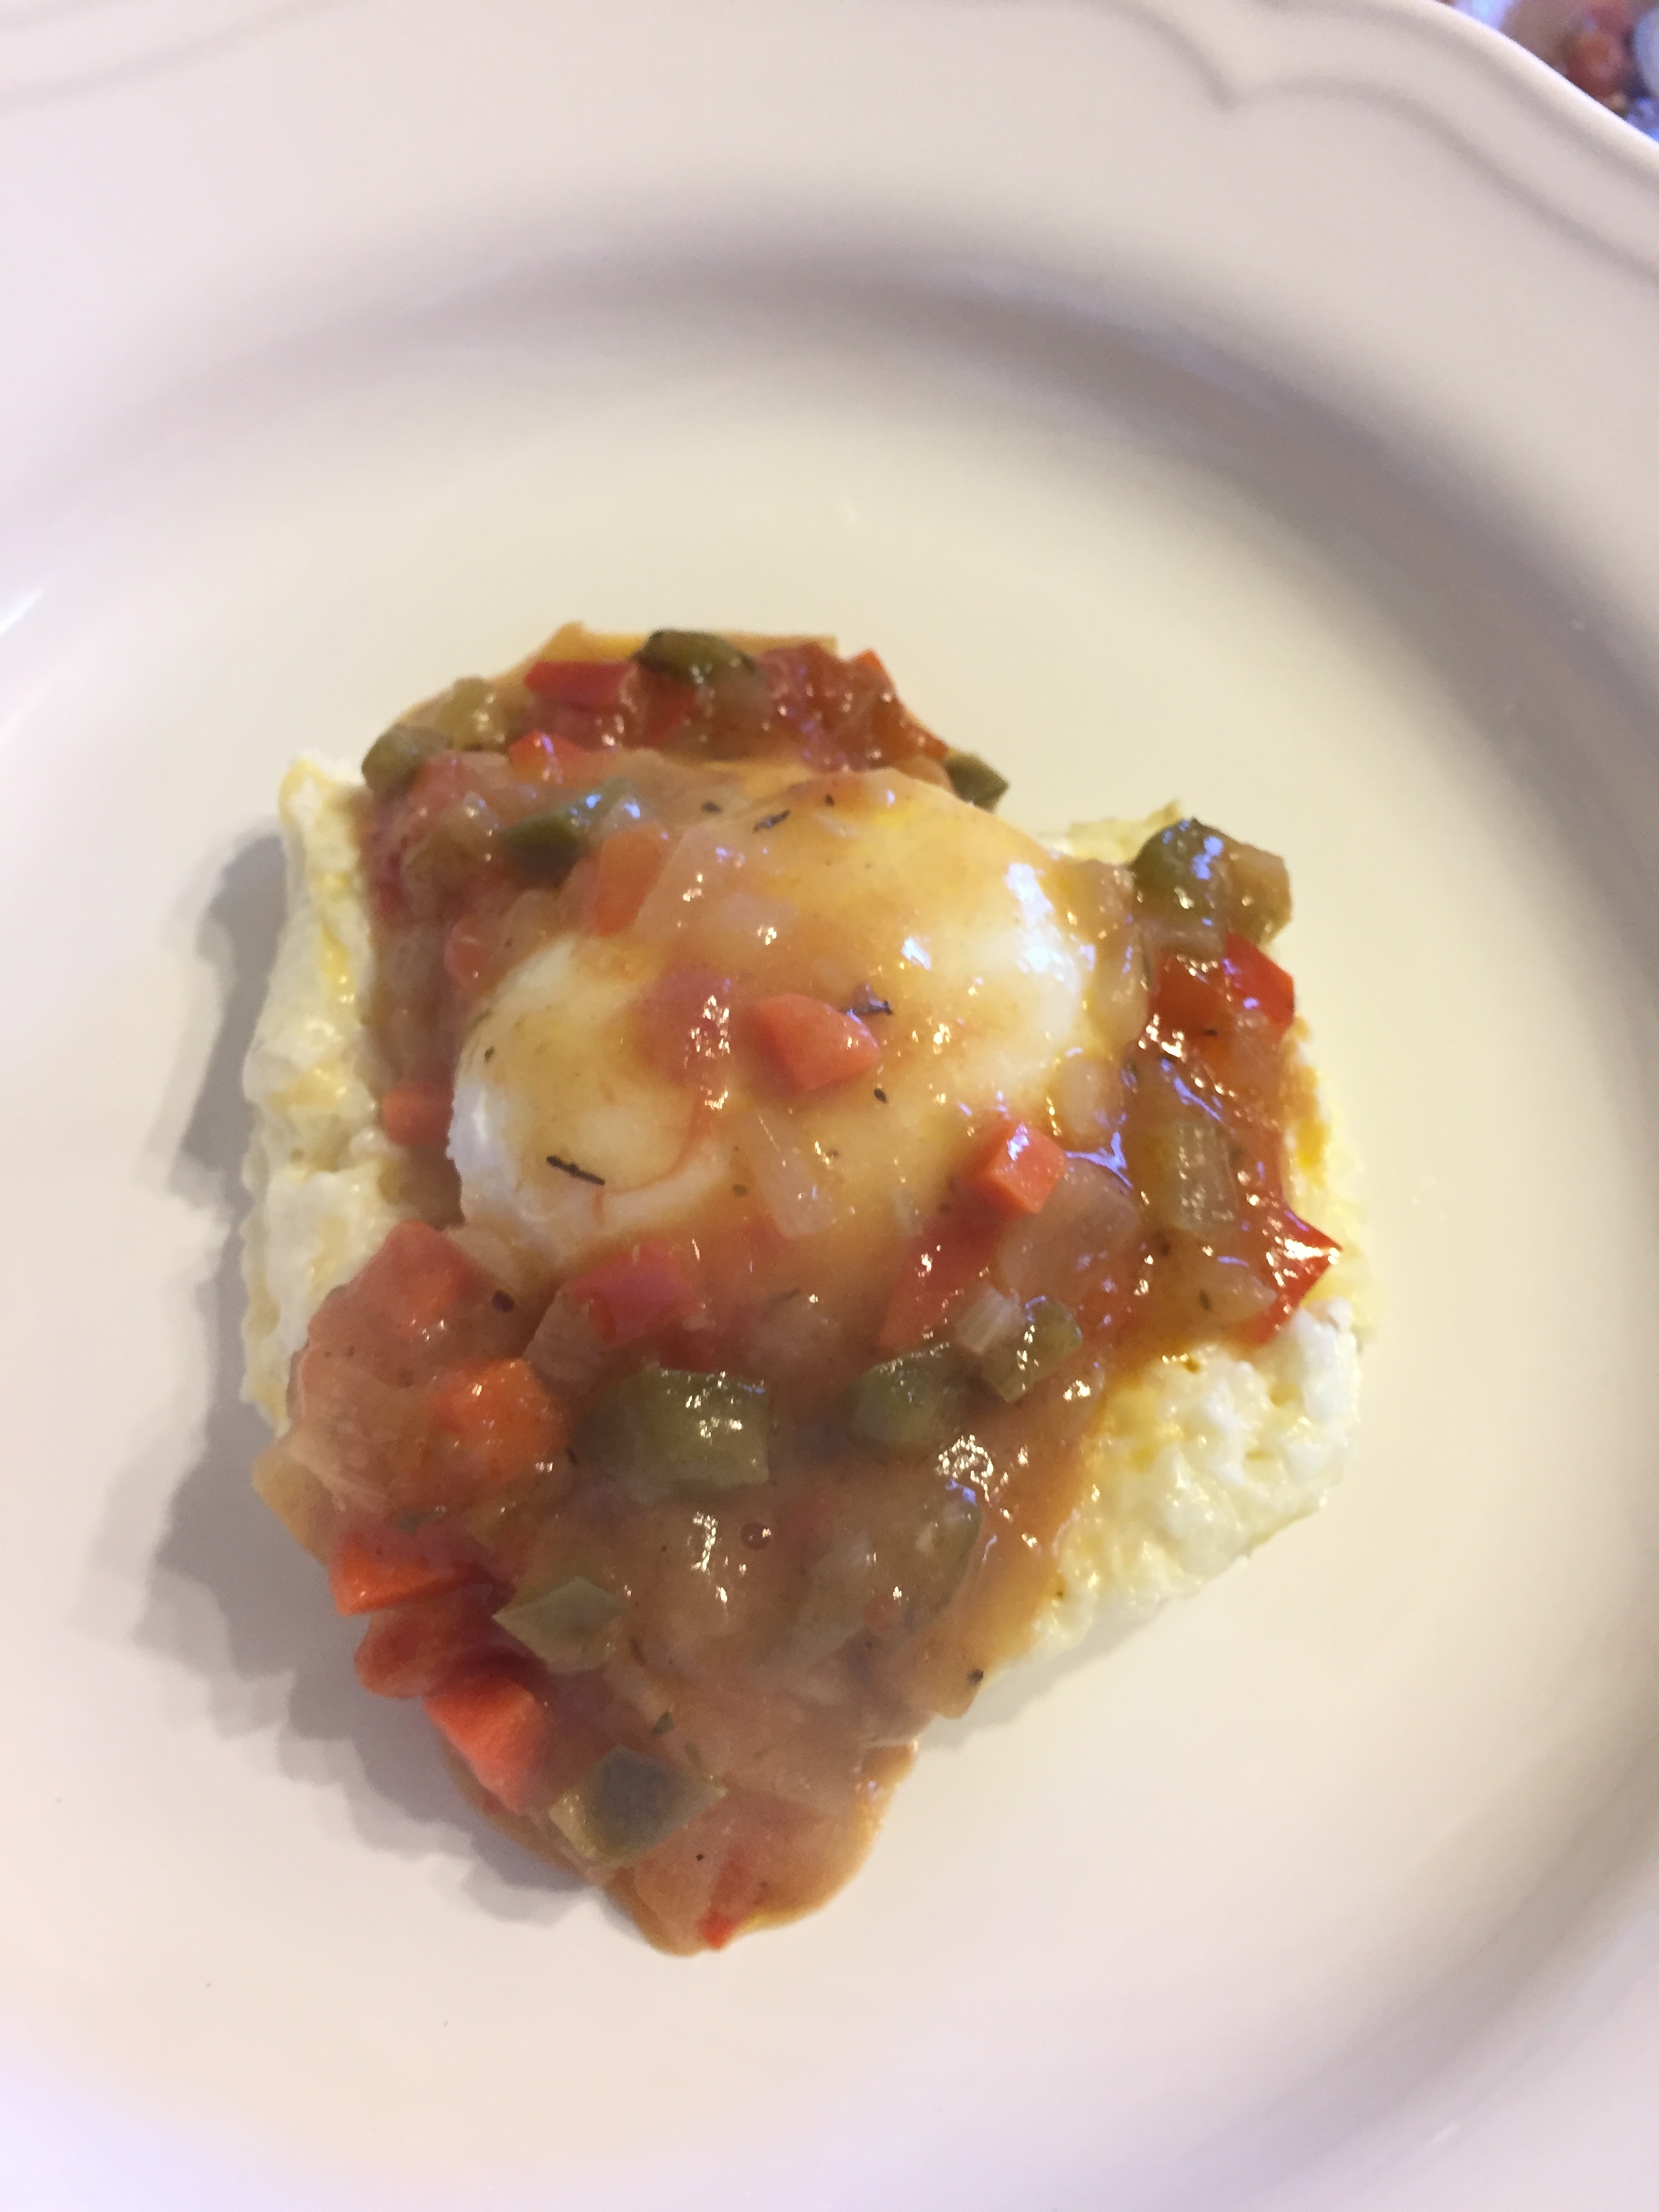 Grtis, Creole Sauce and Poached Egg.jpg